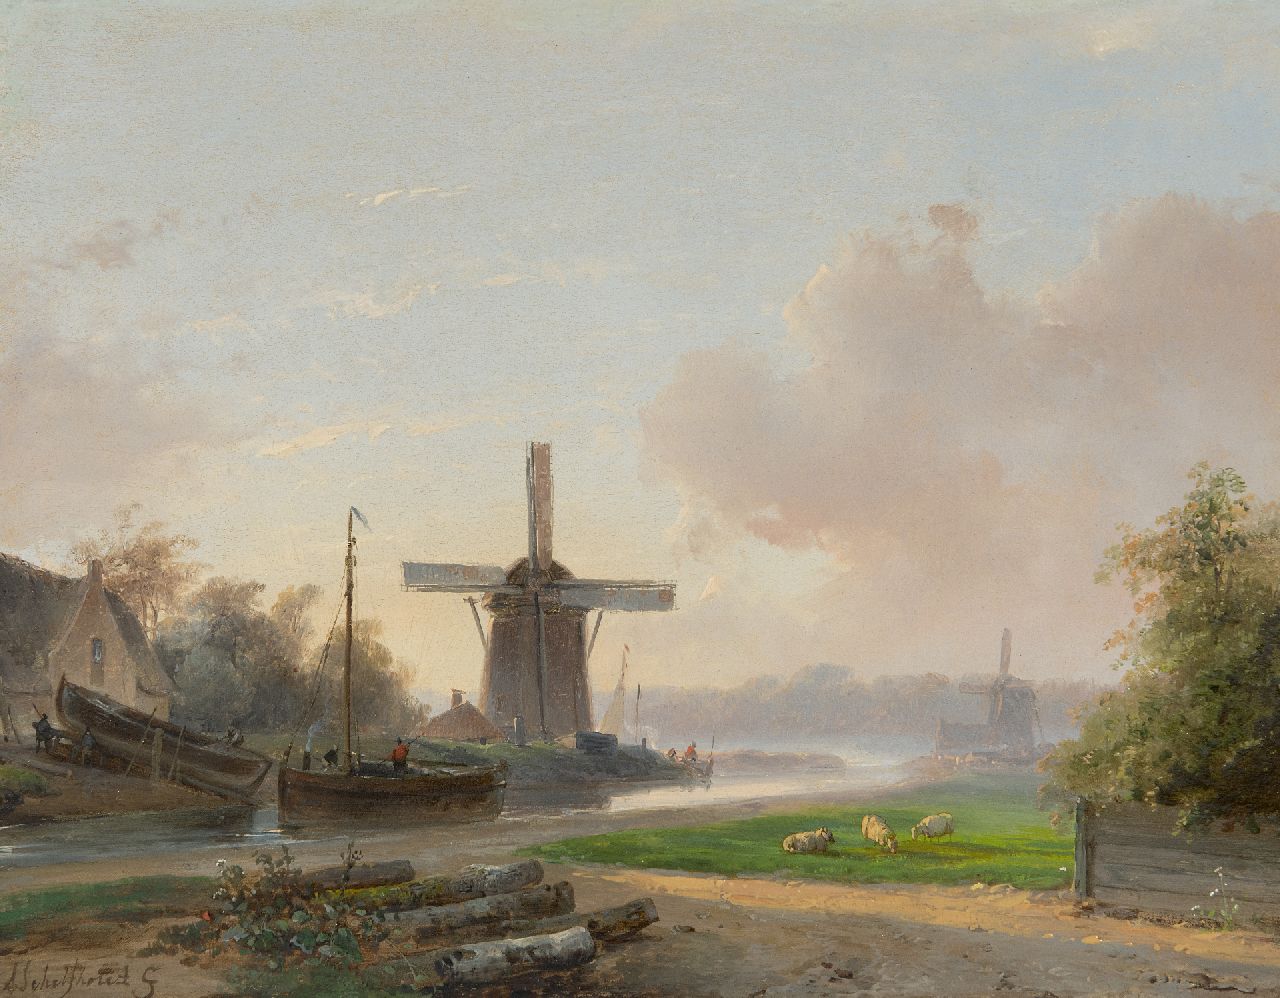 Schelfhout A.  | Andreas Schelfhout | Paintings offered for sale | Eearly morning at the shipyard (only together with winter pendant), oil on panel 25.4 x 32.8 cm, signed l.l.